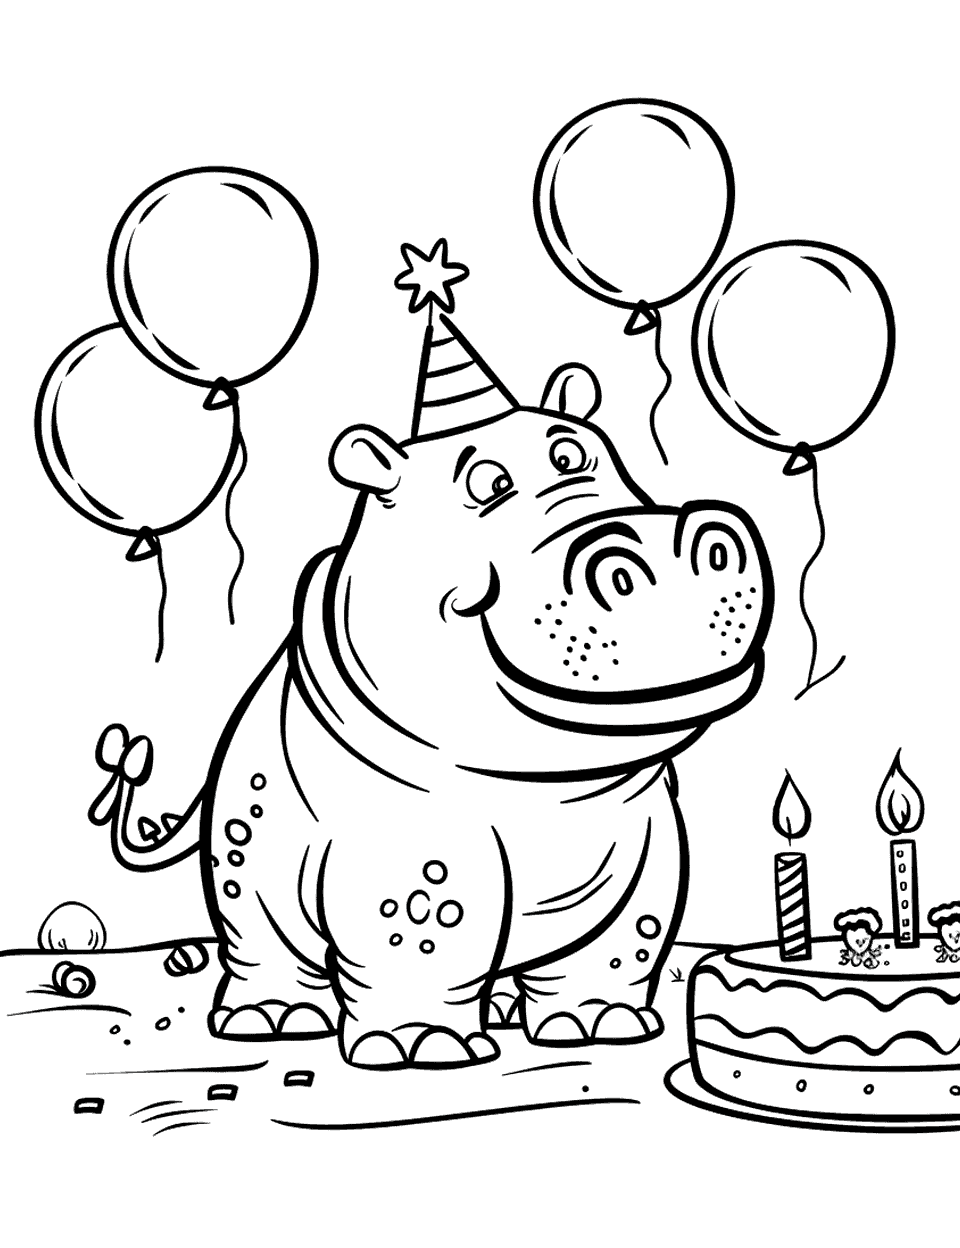 Hippo Birthday Party Coloring Page - Hippos celebrating with balloons and cake at a birthday party.